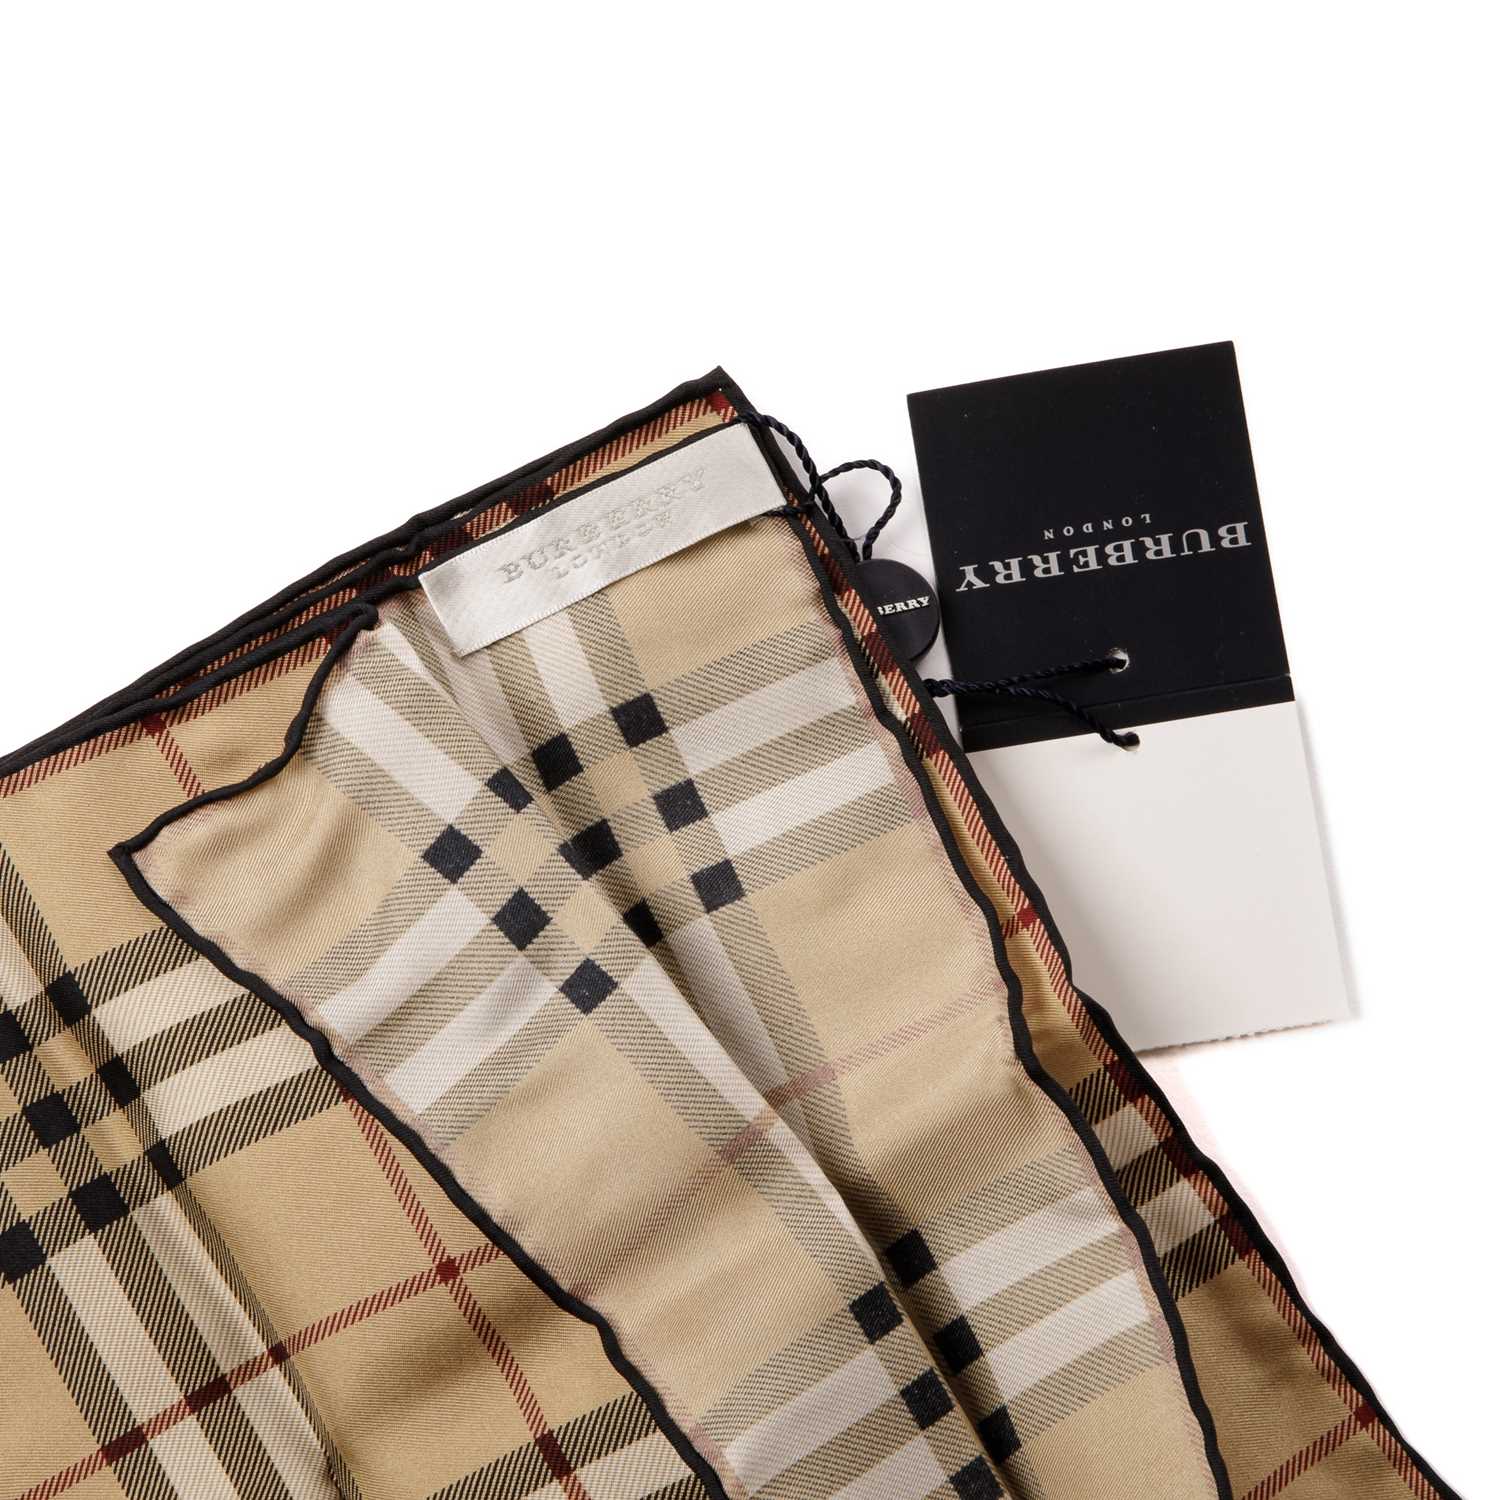 Burberry, two Nova Check silk handkerchiefs, with hand-rolled edges, measuring 47 by 47cm, with - Image 5 of 6